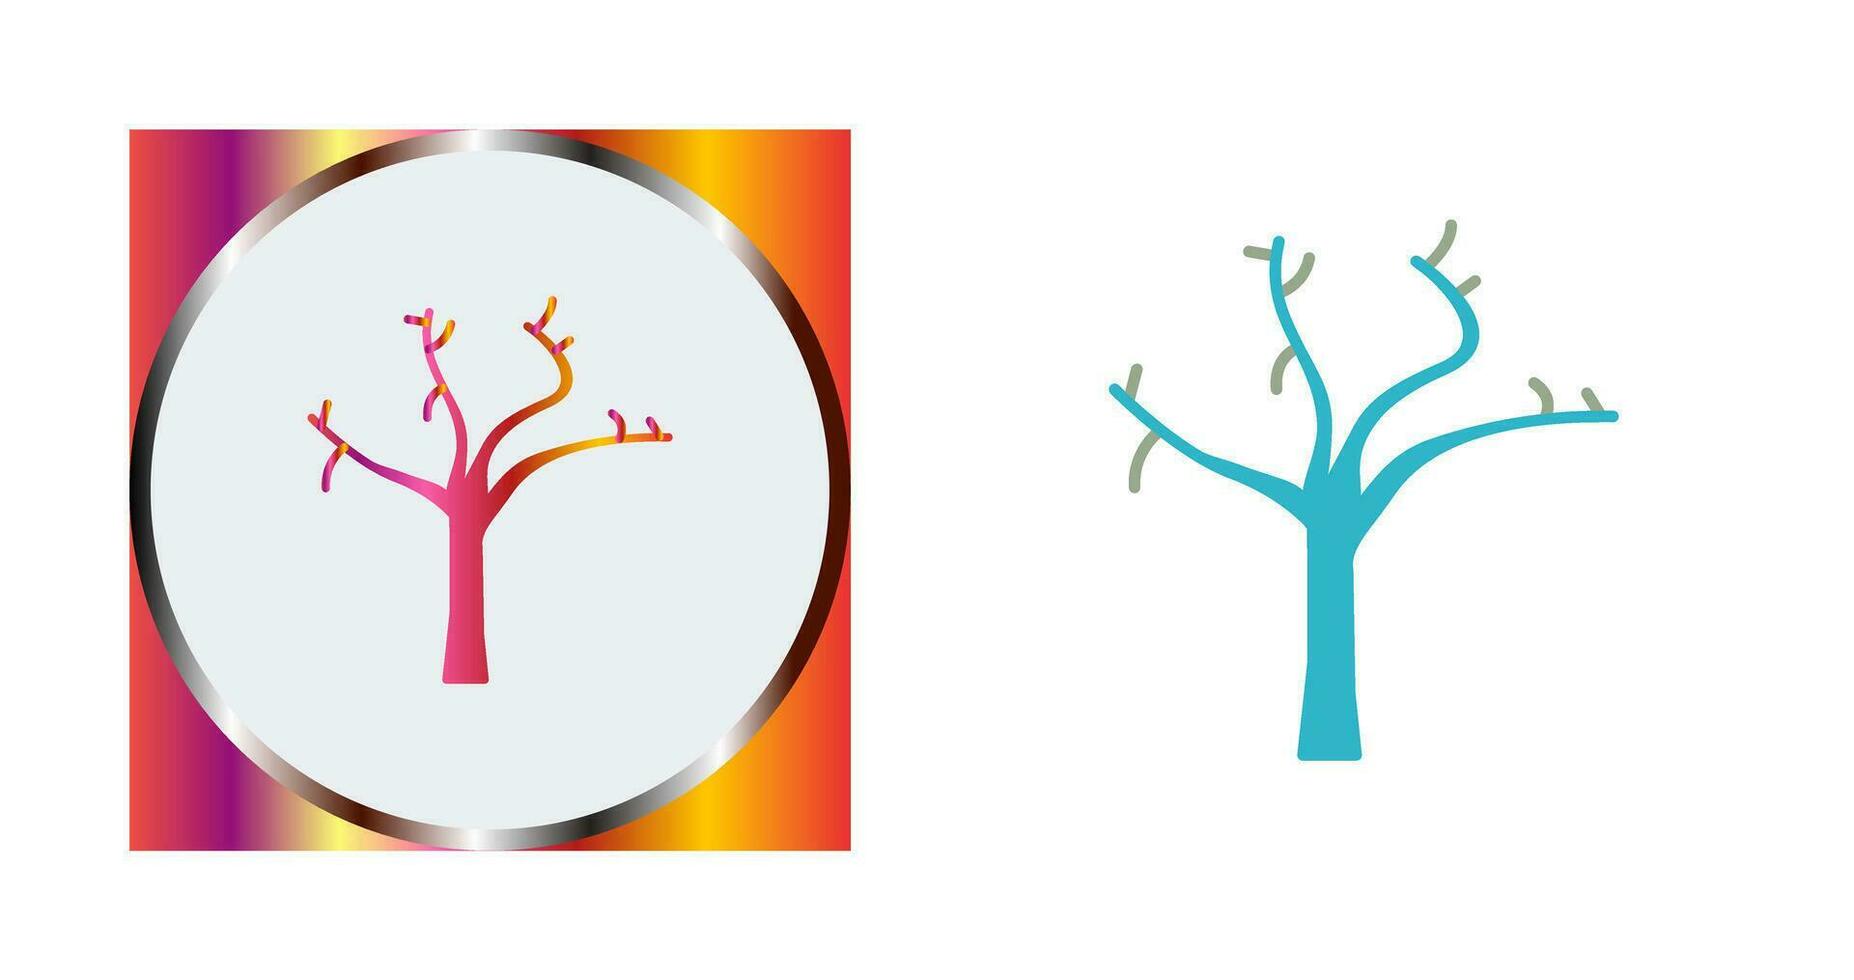 Tree with no Leaves Vector Icon